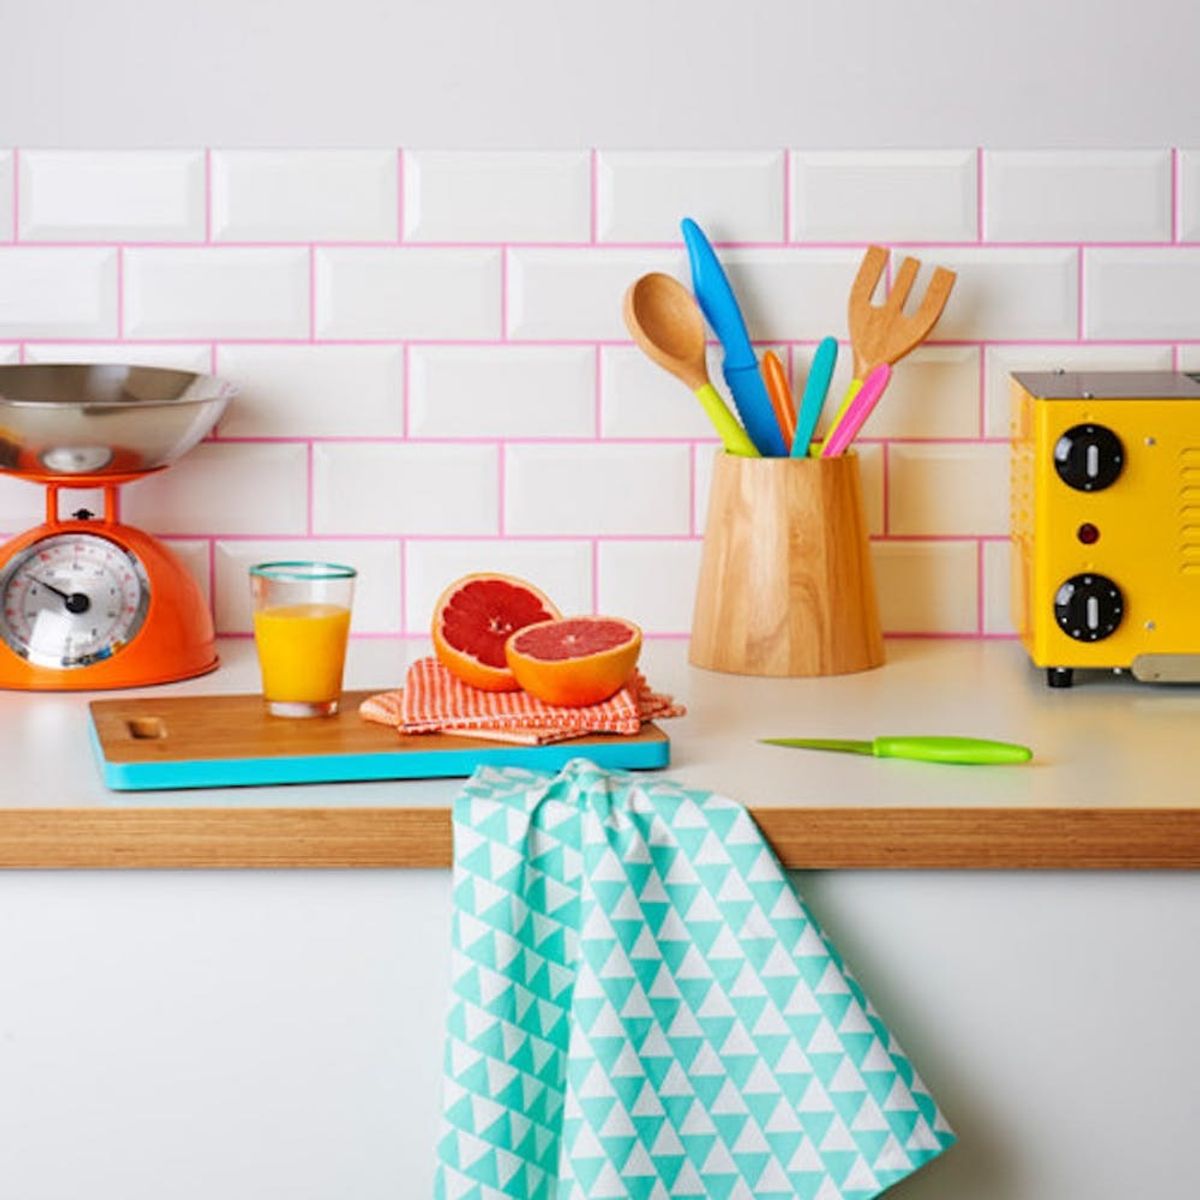 Colorful Grout Is a Thing and It’s Ah-mazing